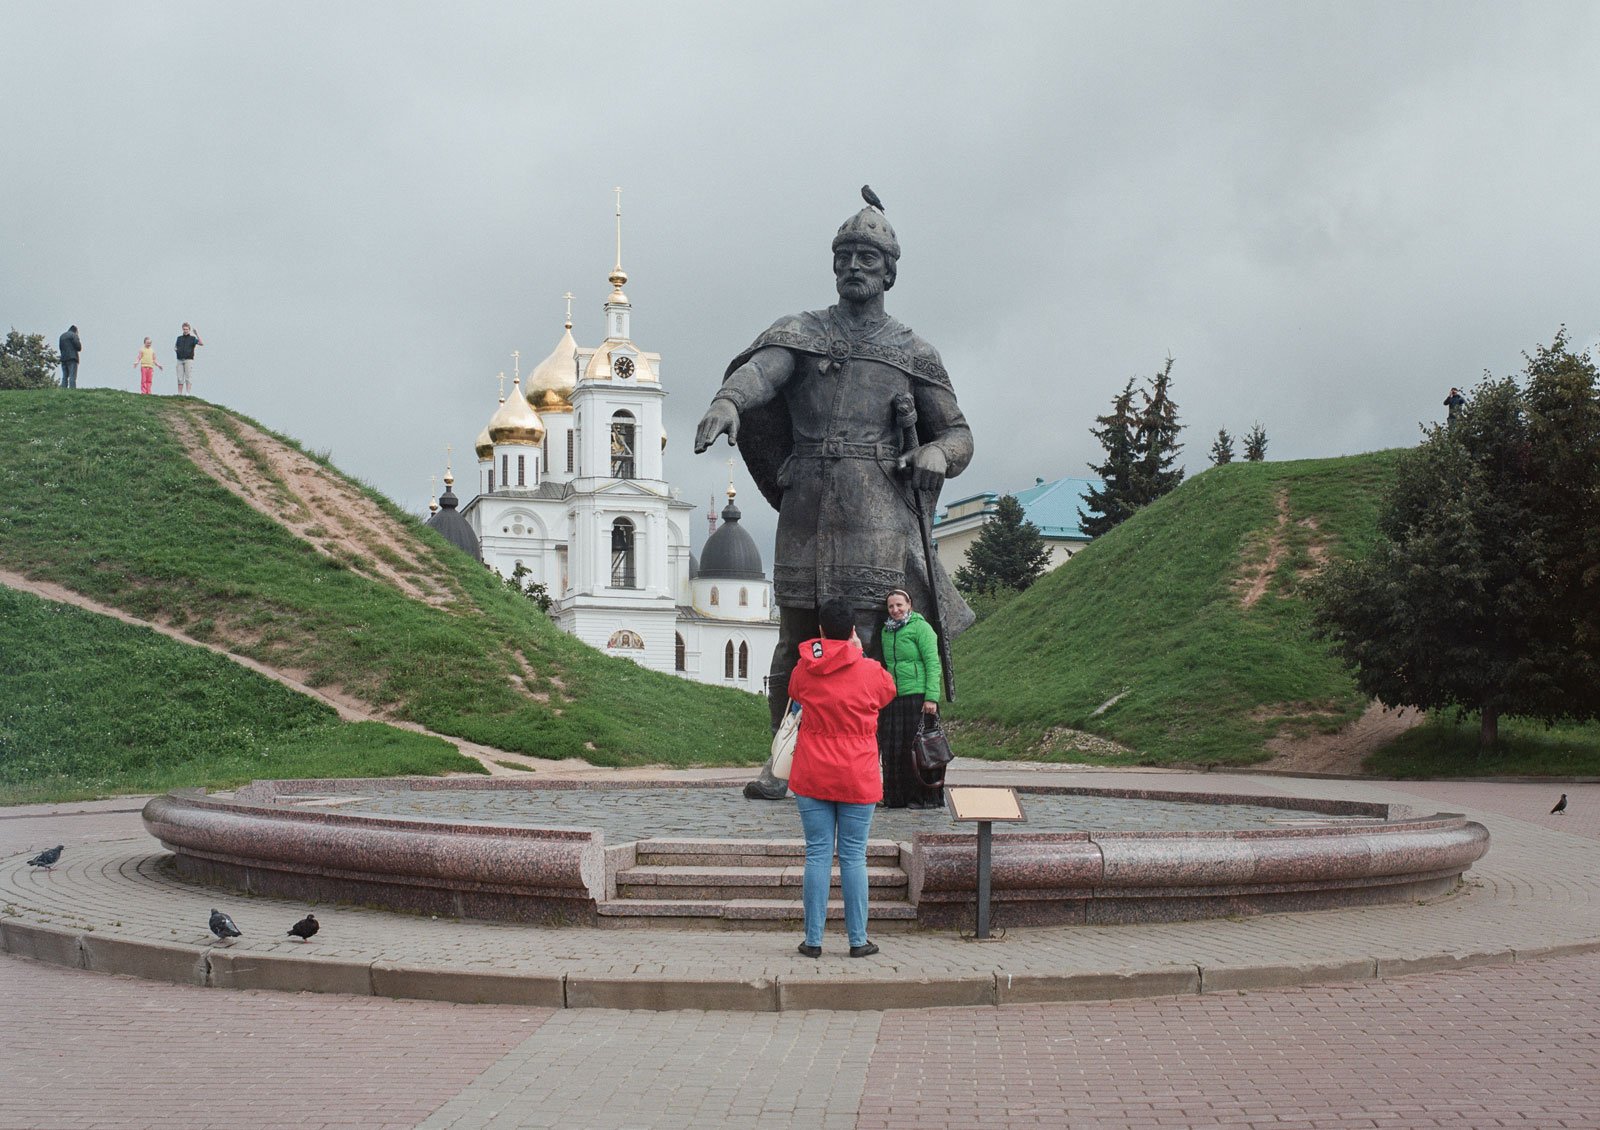 Lofty statues and roadside oddities: what can we learn about Russia in Moscow’s margins? 